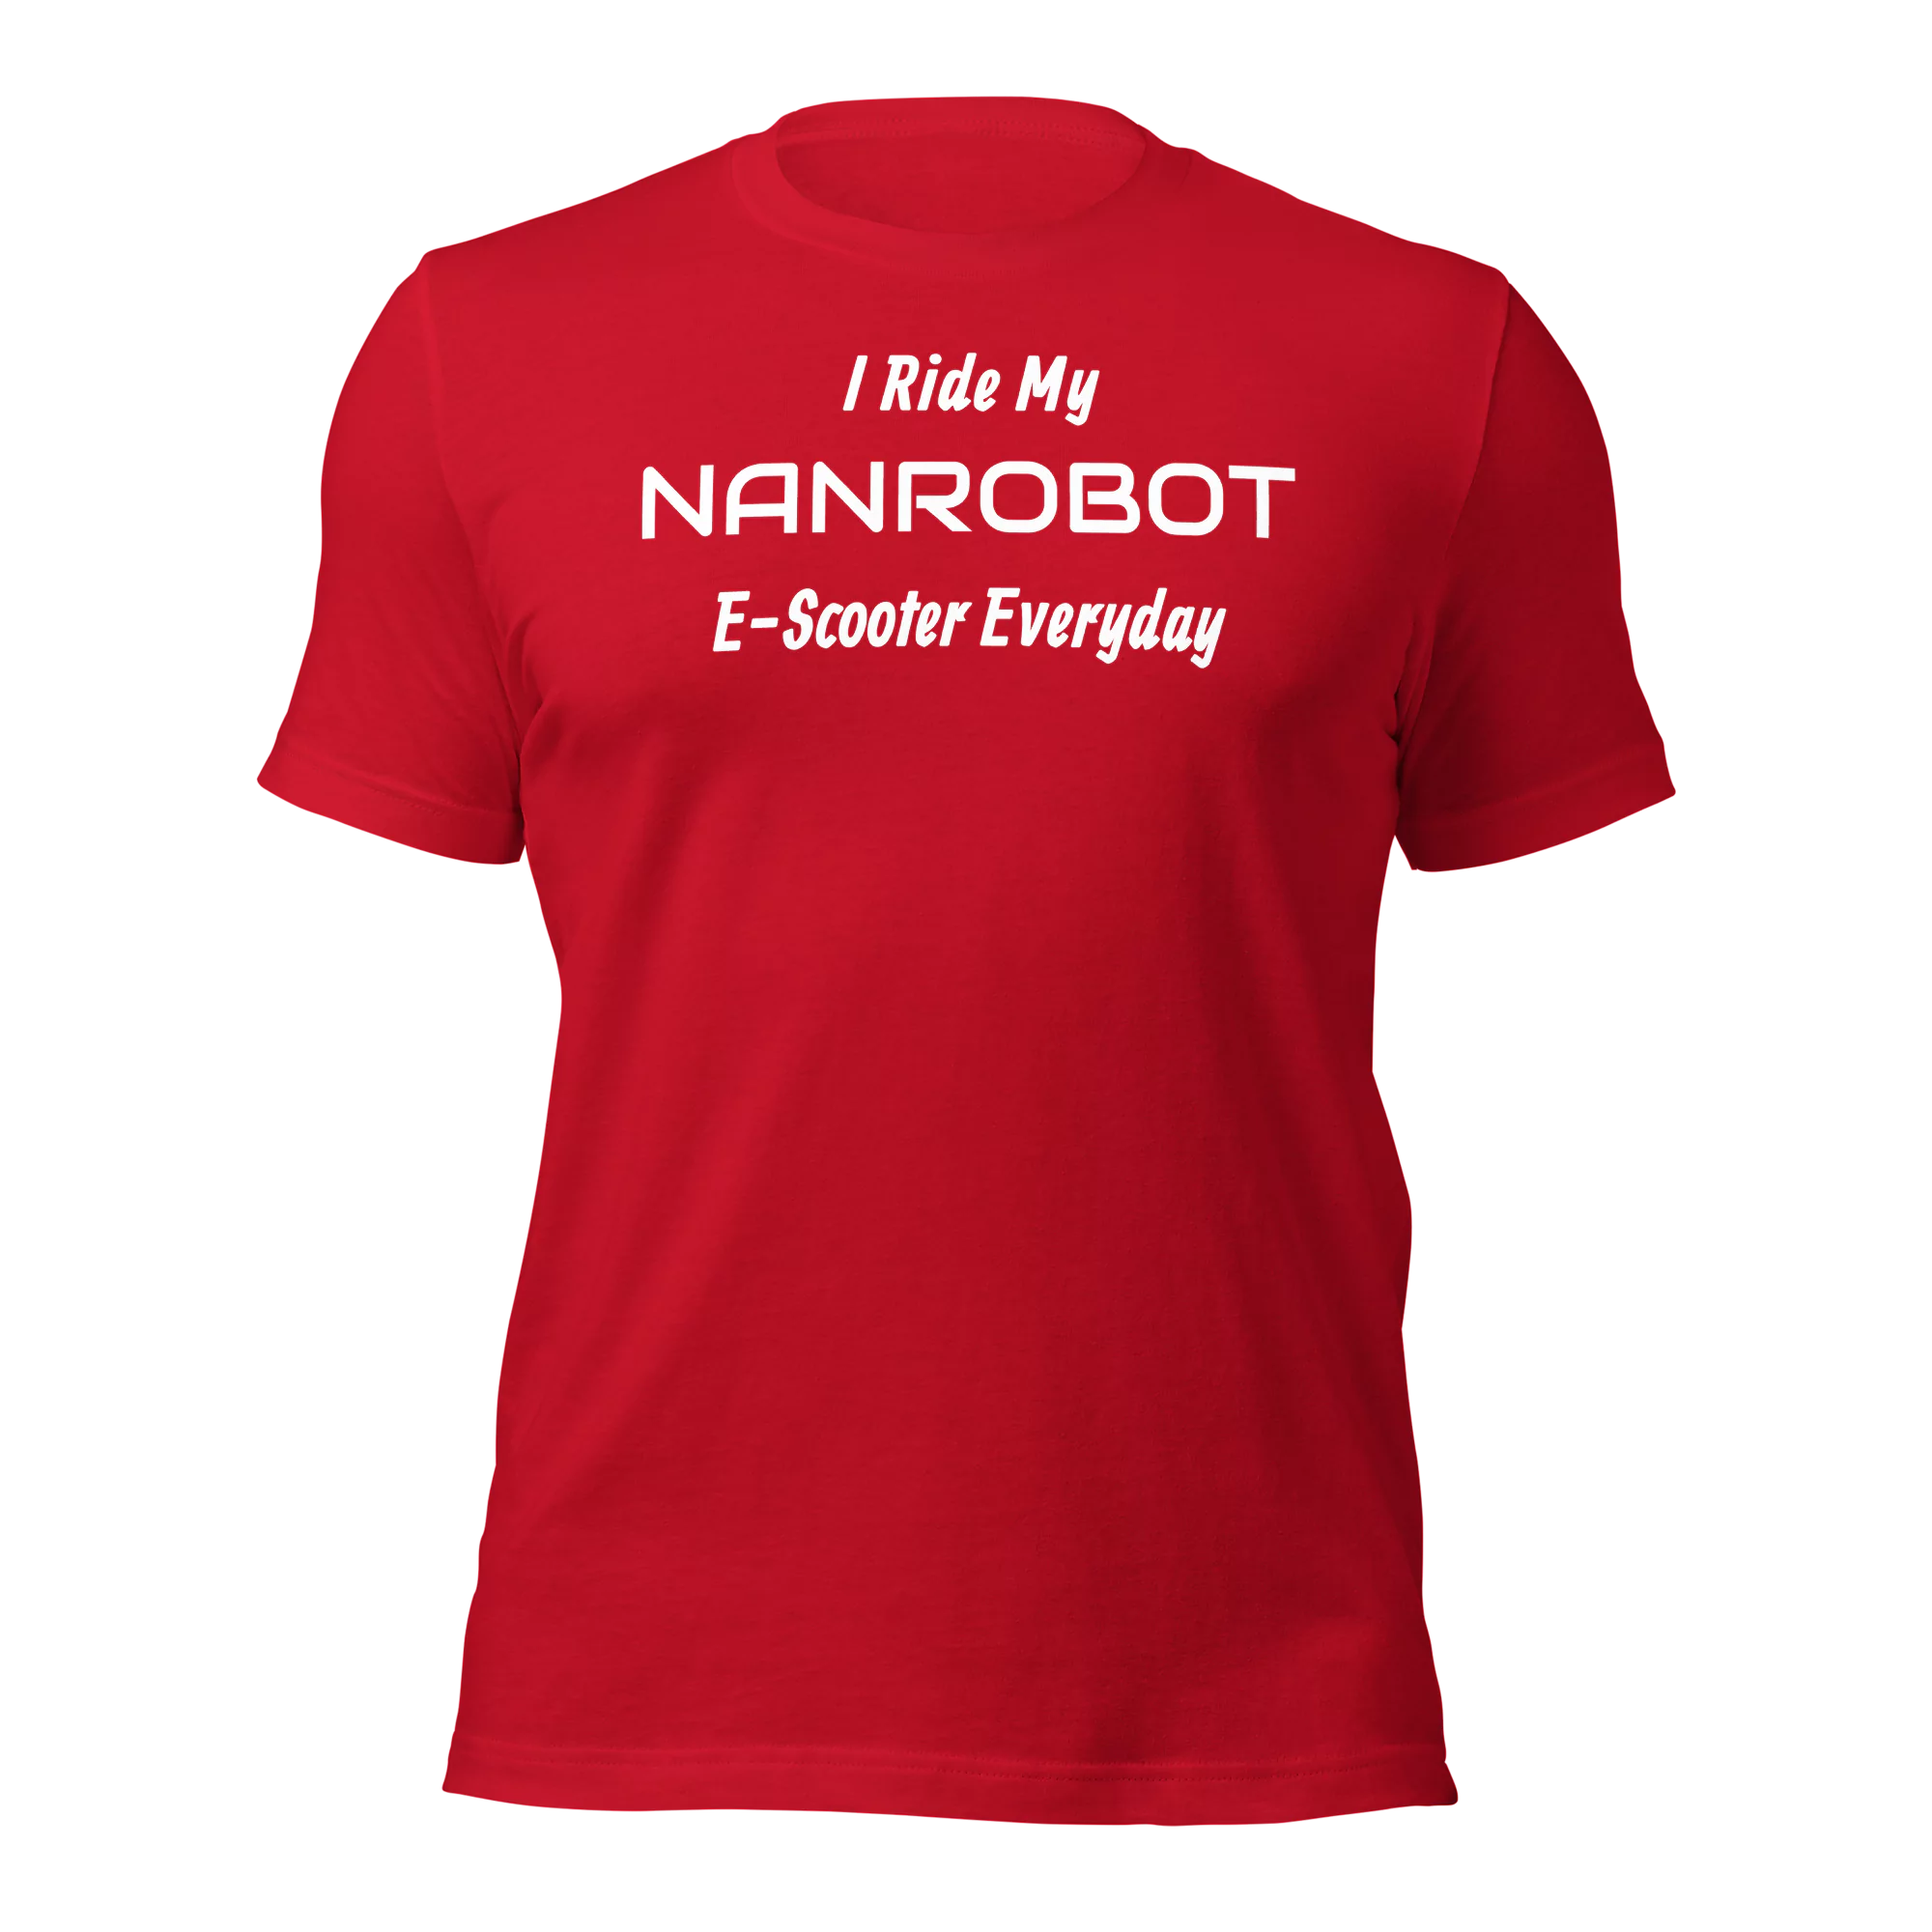 Funny T-Shirt: I Ride My NANROBOT E-Scooter Everyday (Red)